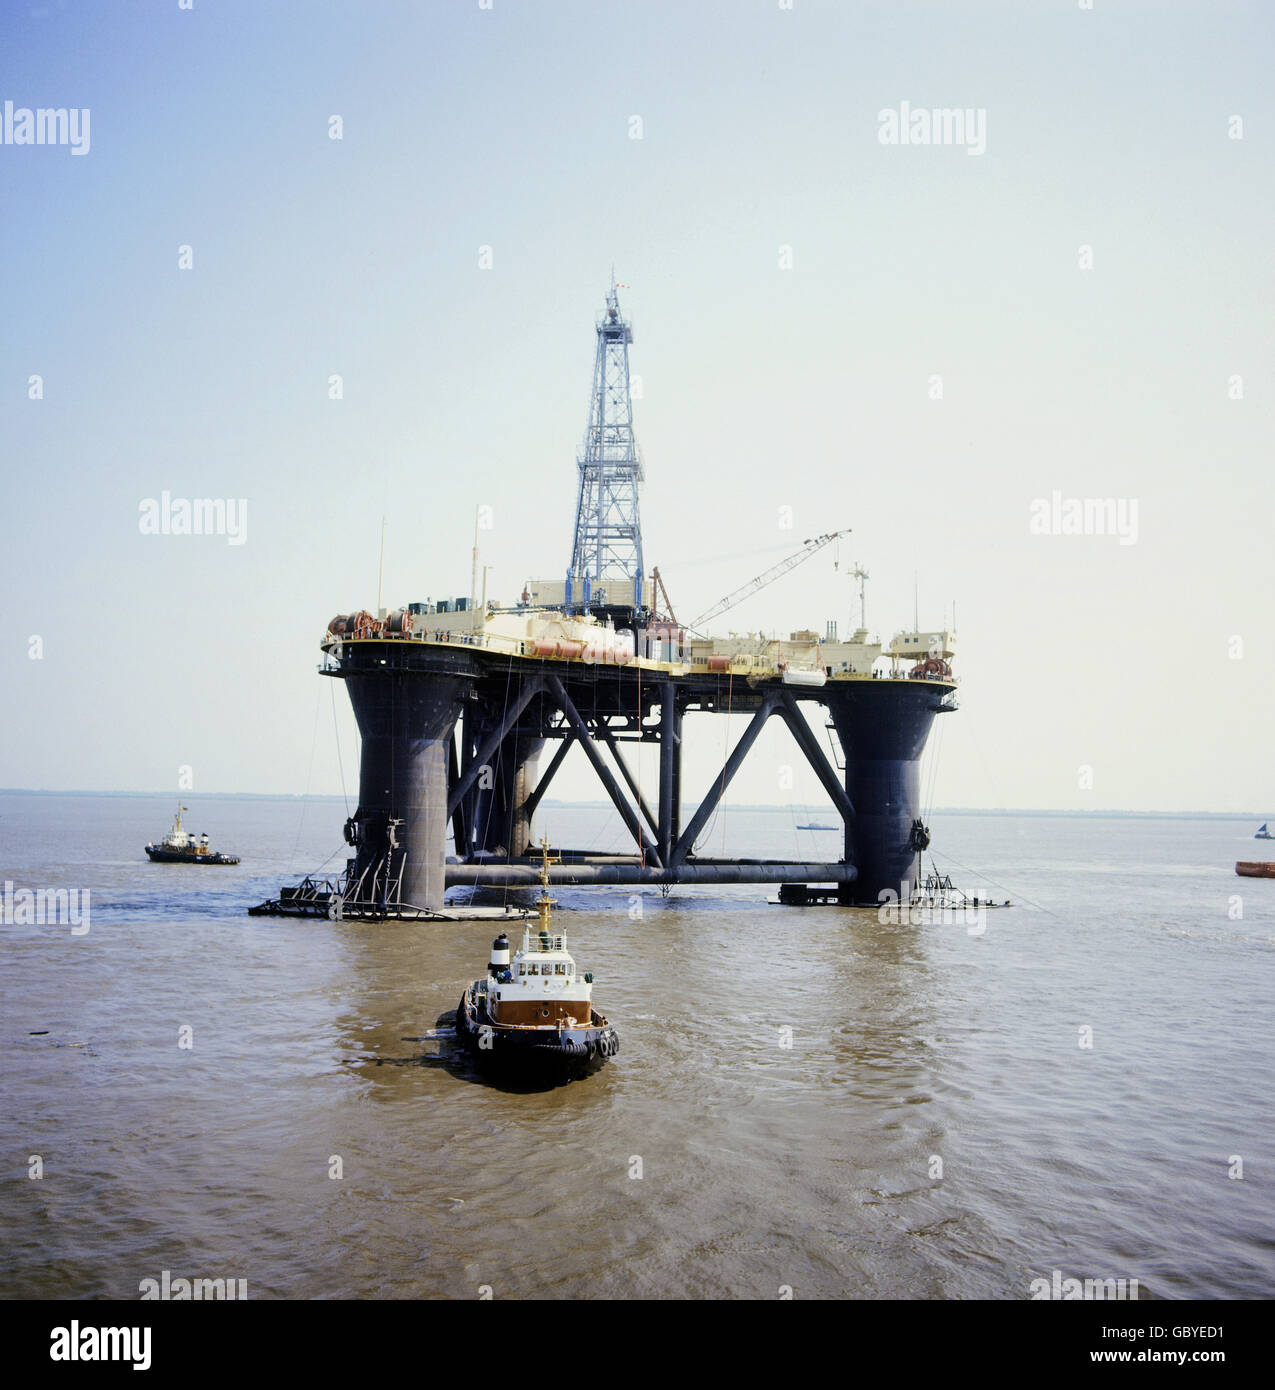 industry,oil,drilling platform on the sea,drilling platform Scarbeo 3,German Bight,circa 1970,1970s,70s,20th century,historic,historical,North Sea,drilling platform,oil rig,drilling platforms,oil rigs,Esso,Shell,swim,swimming,shaft tower,production derrick,shaft towers,production derricks,drilling derrick,wellhead,boring tower,boring trestle,drill tower,drill rig,drilling derricks,wellheads,boring towers,boring trestles,drill towers,drill rigs,platform,platforms,fixed offshore platform,crude oil,crude naphtha,raw oil,ba,Additional-Rights-Clearences-Not Available Stock Photo